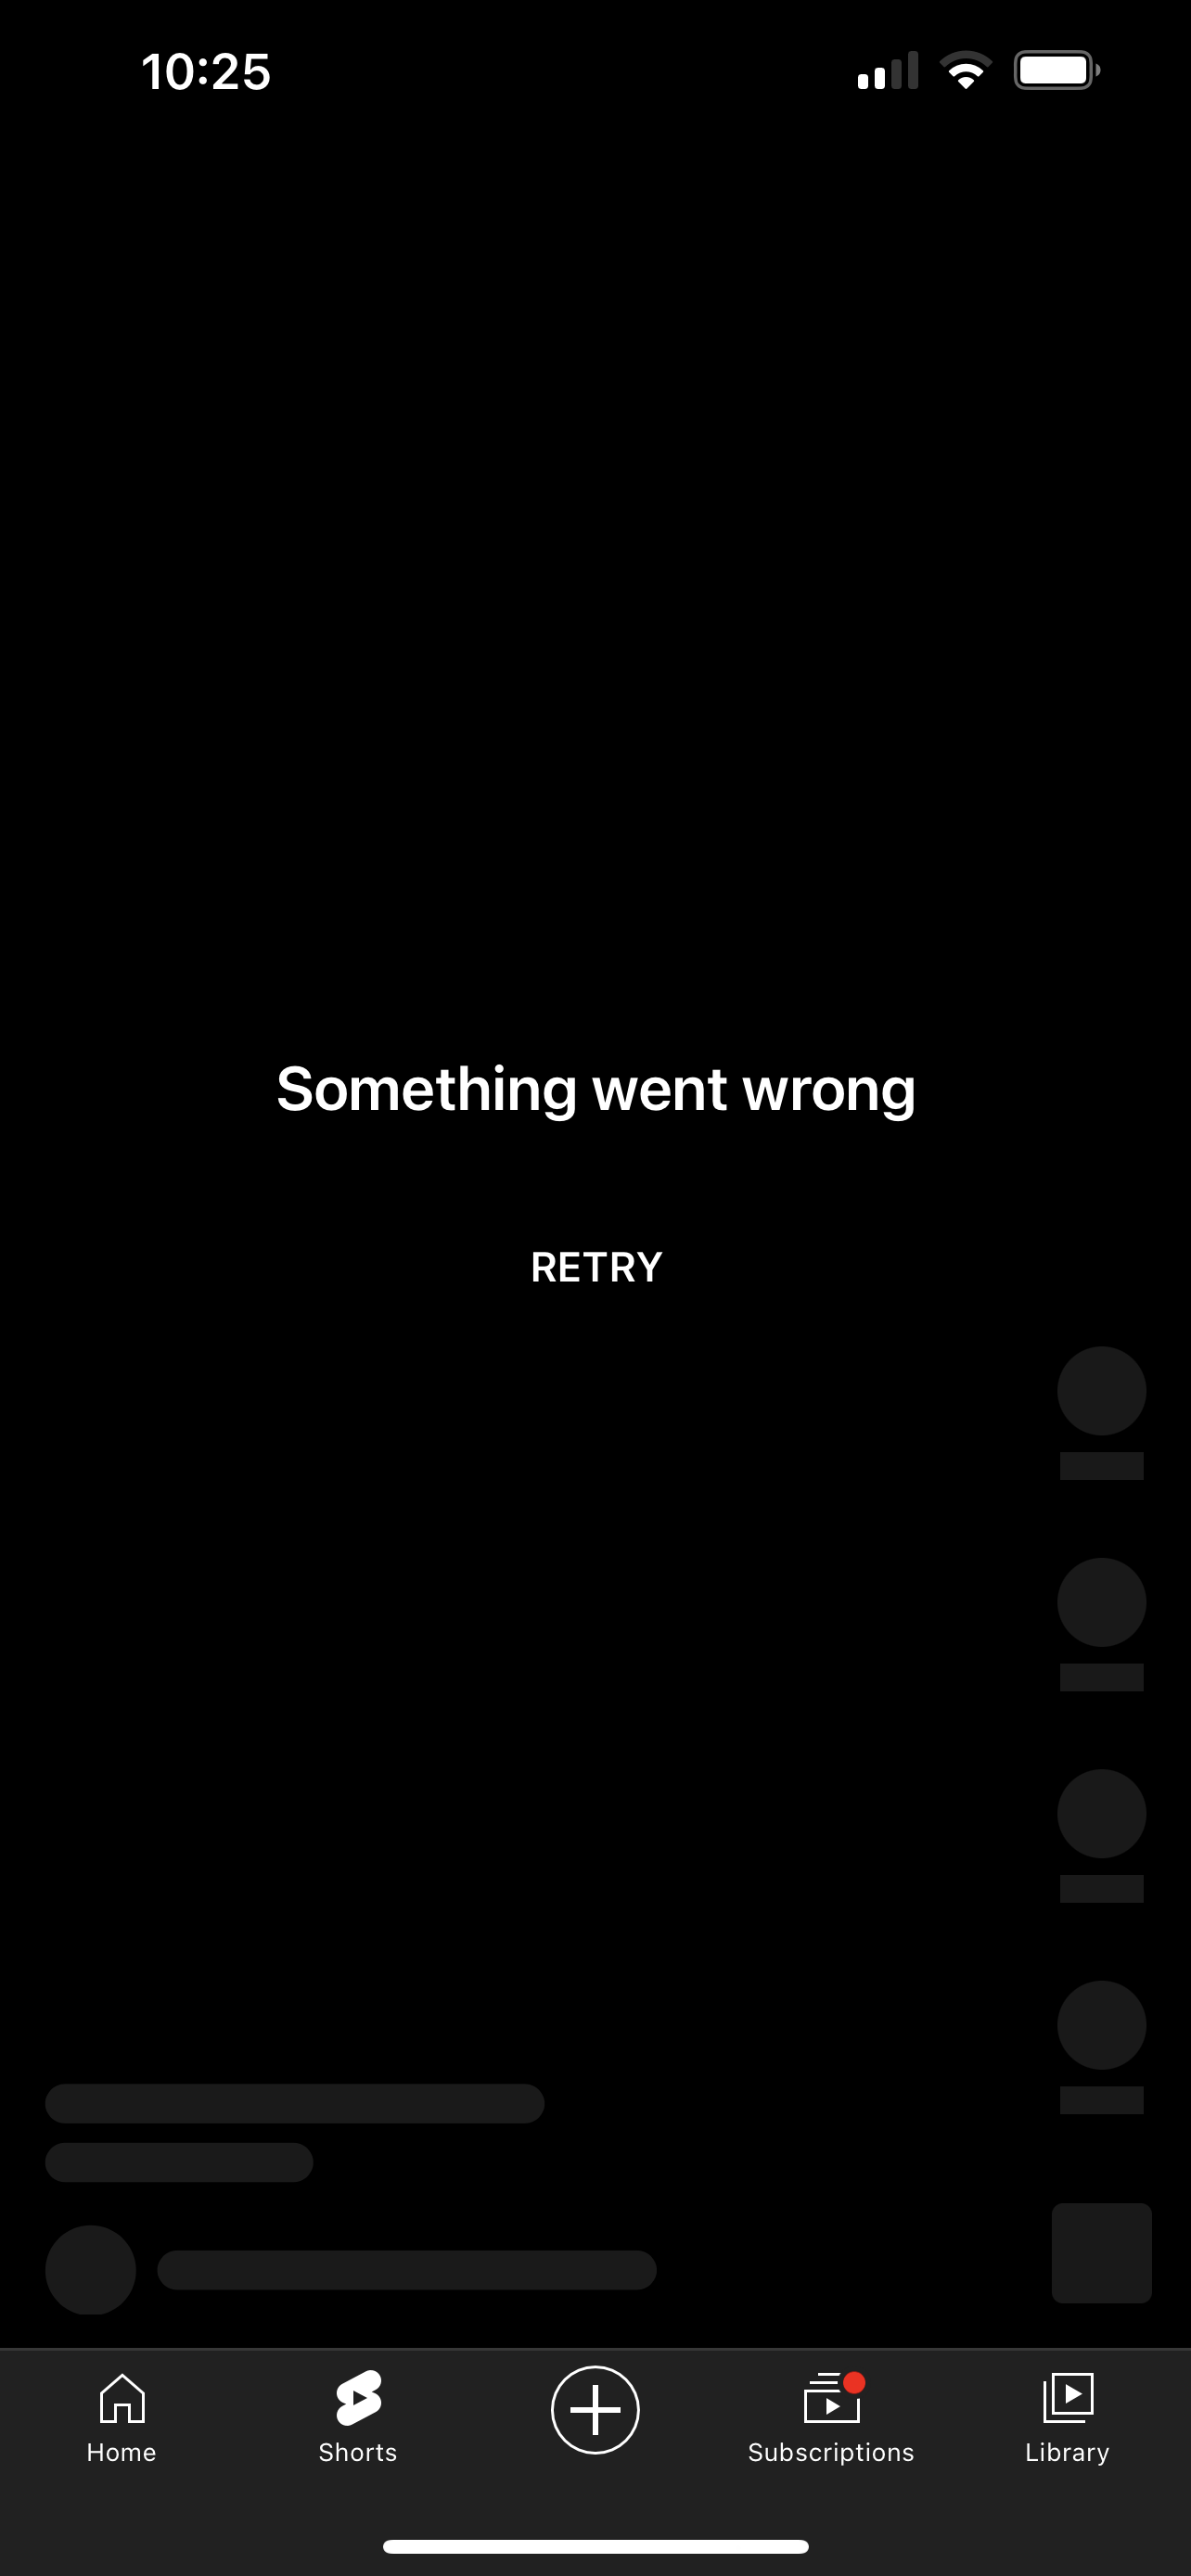 YouTube Shorts "Something went wrong" error message and keep buffering or aren't showing, working, playing, or loading